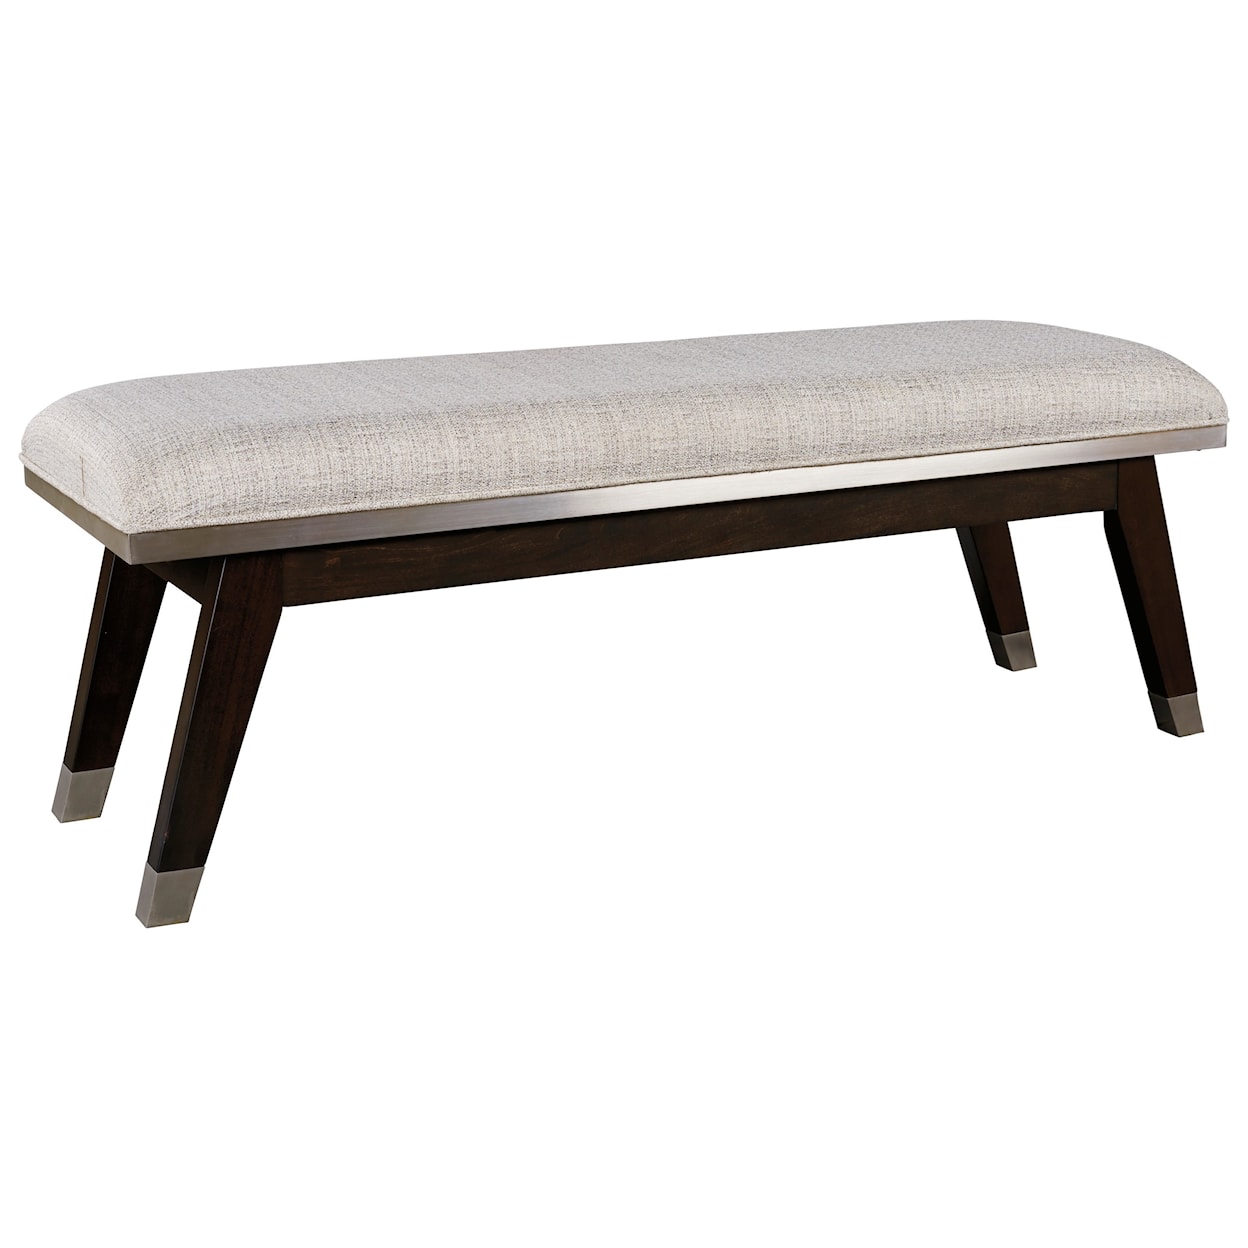 Signature Design by Ashley Maretto Upholstered Bench